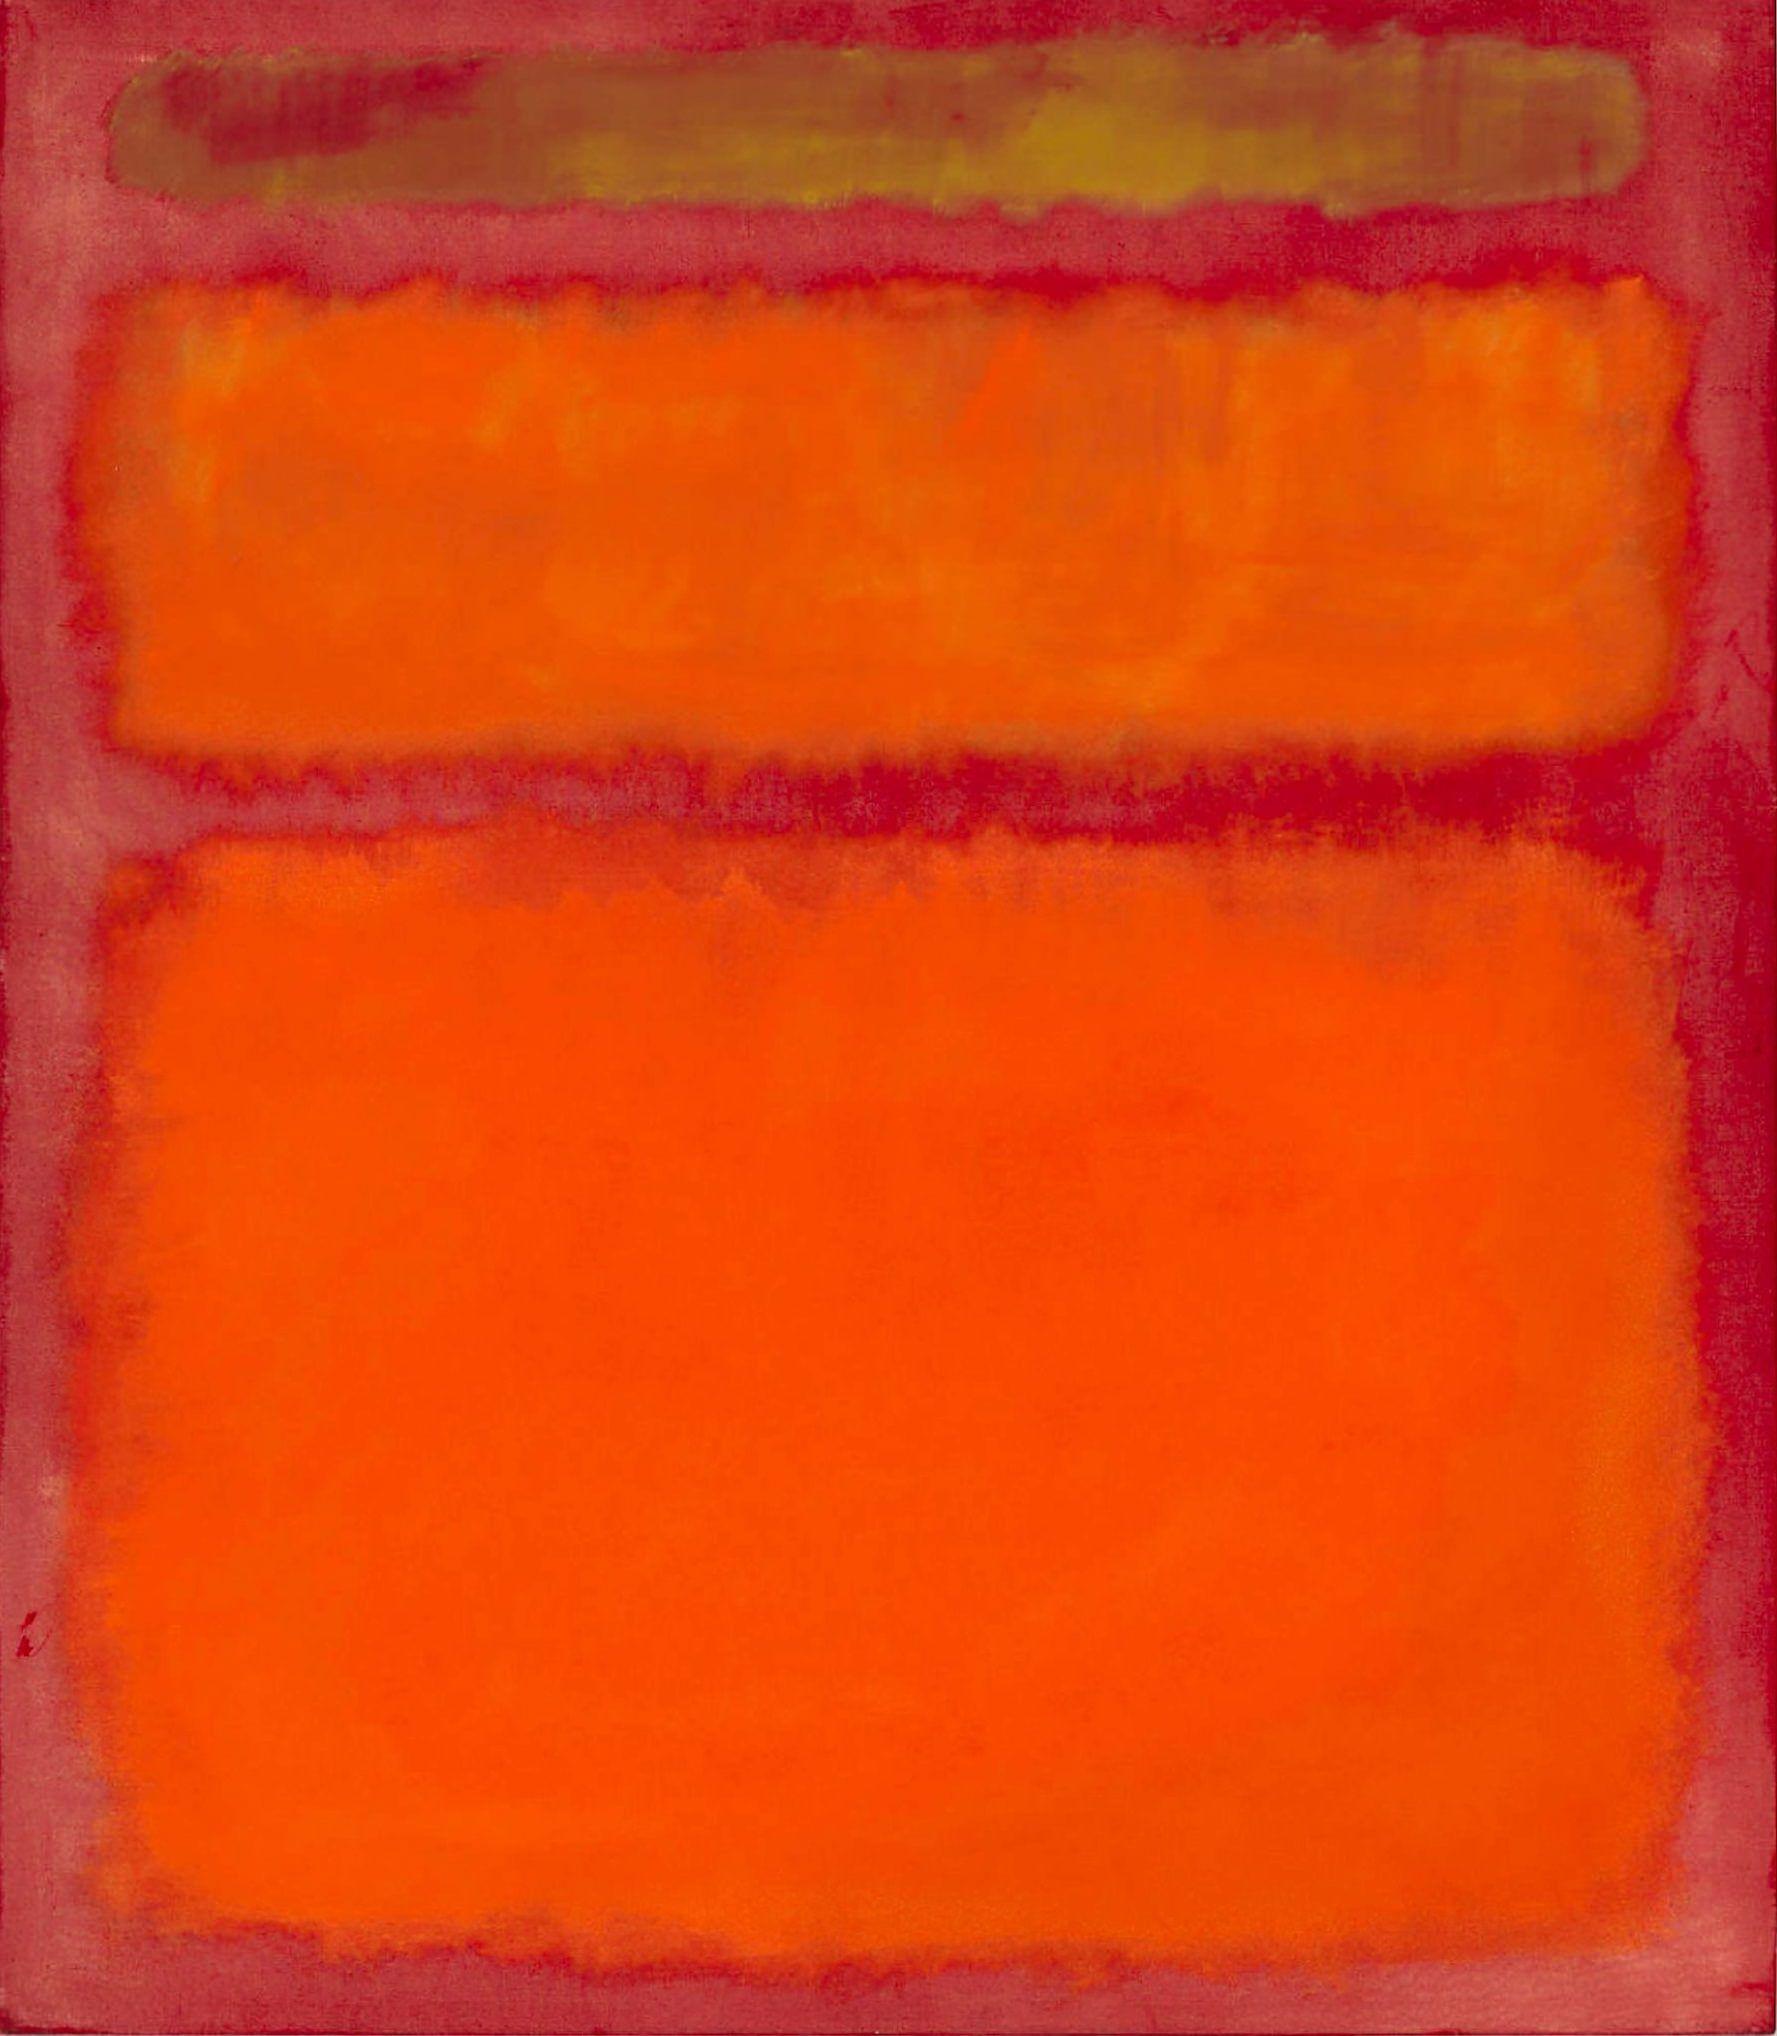 Red and Yellow Square Logo - Orange, Red, Yellow, 1961 by Mark Rothko